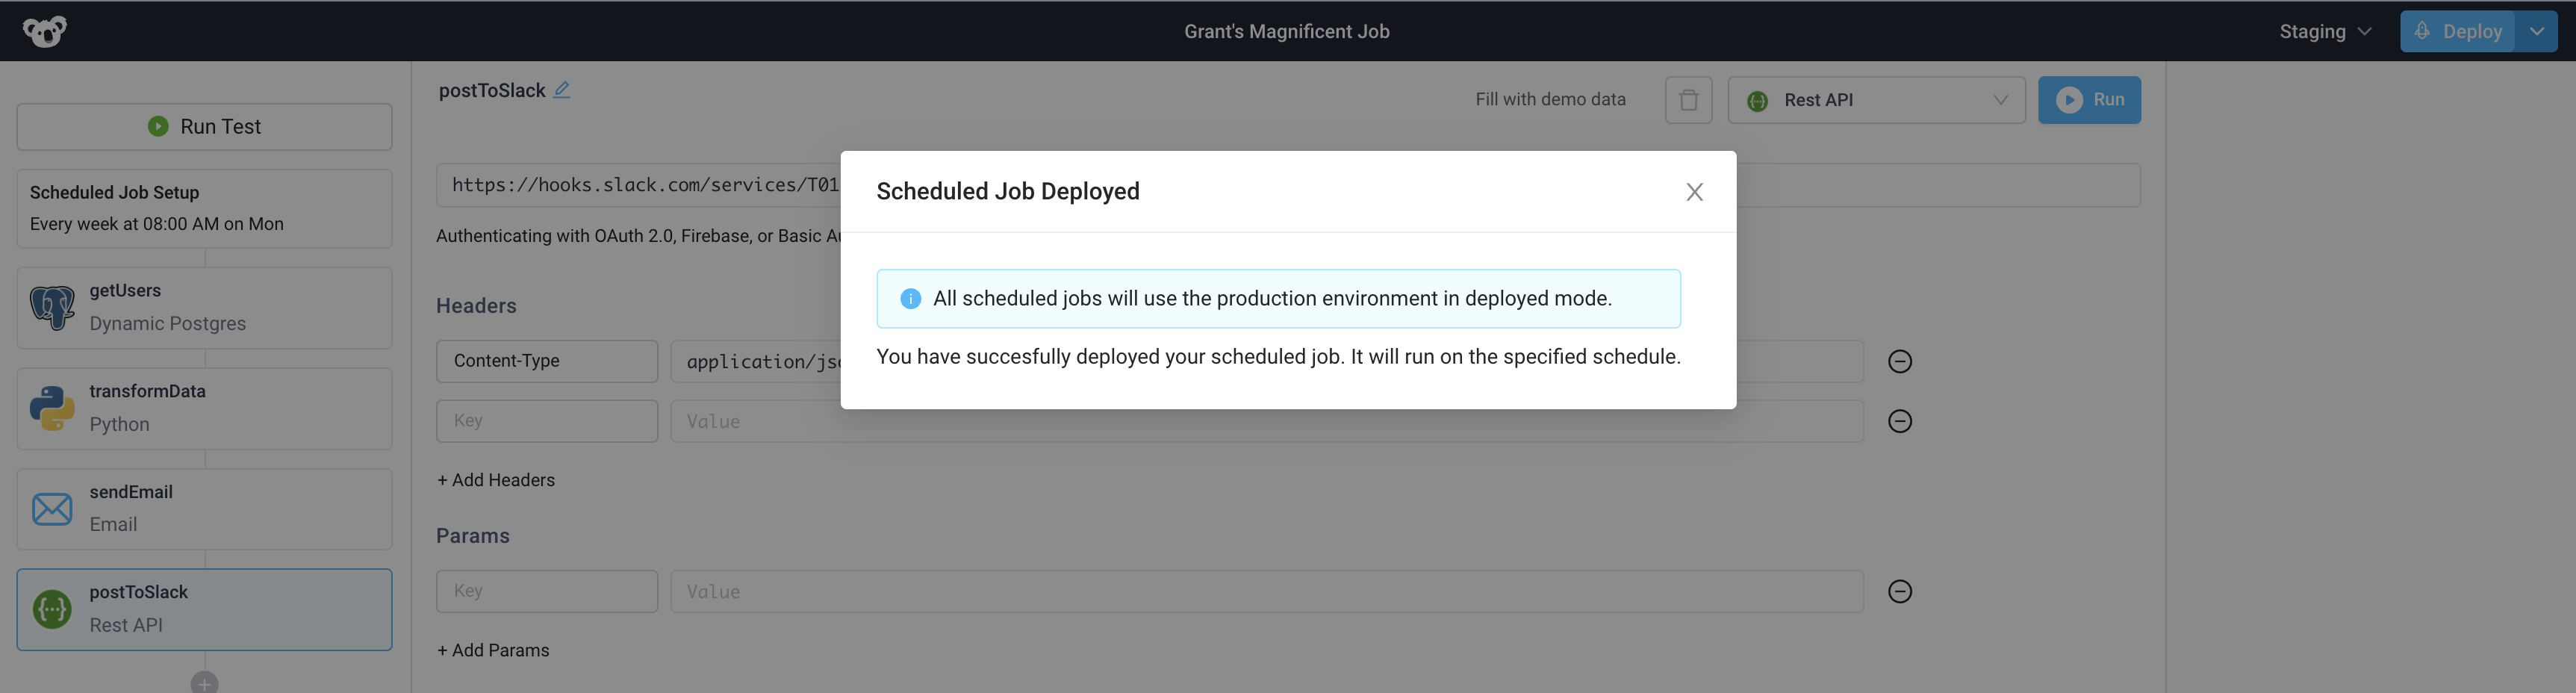 Successfully deployed jobs will be run on the specified schedule and run against production environment settings